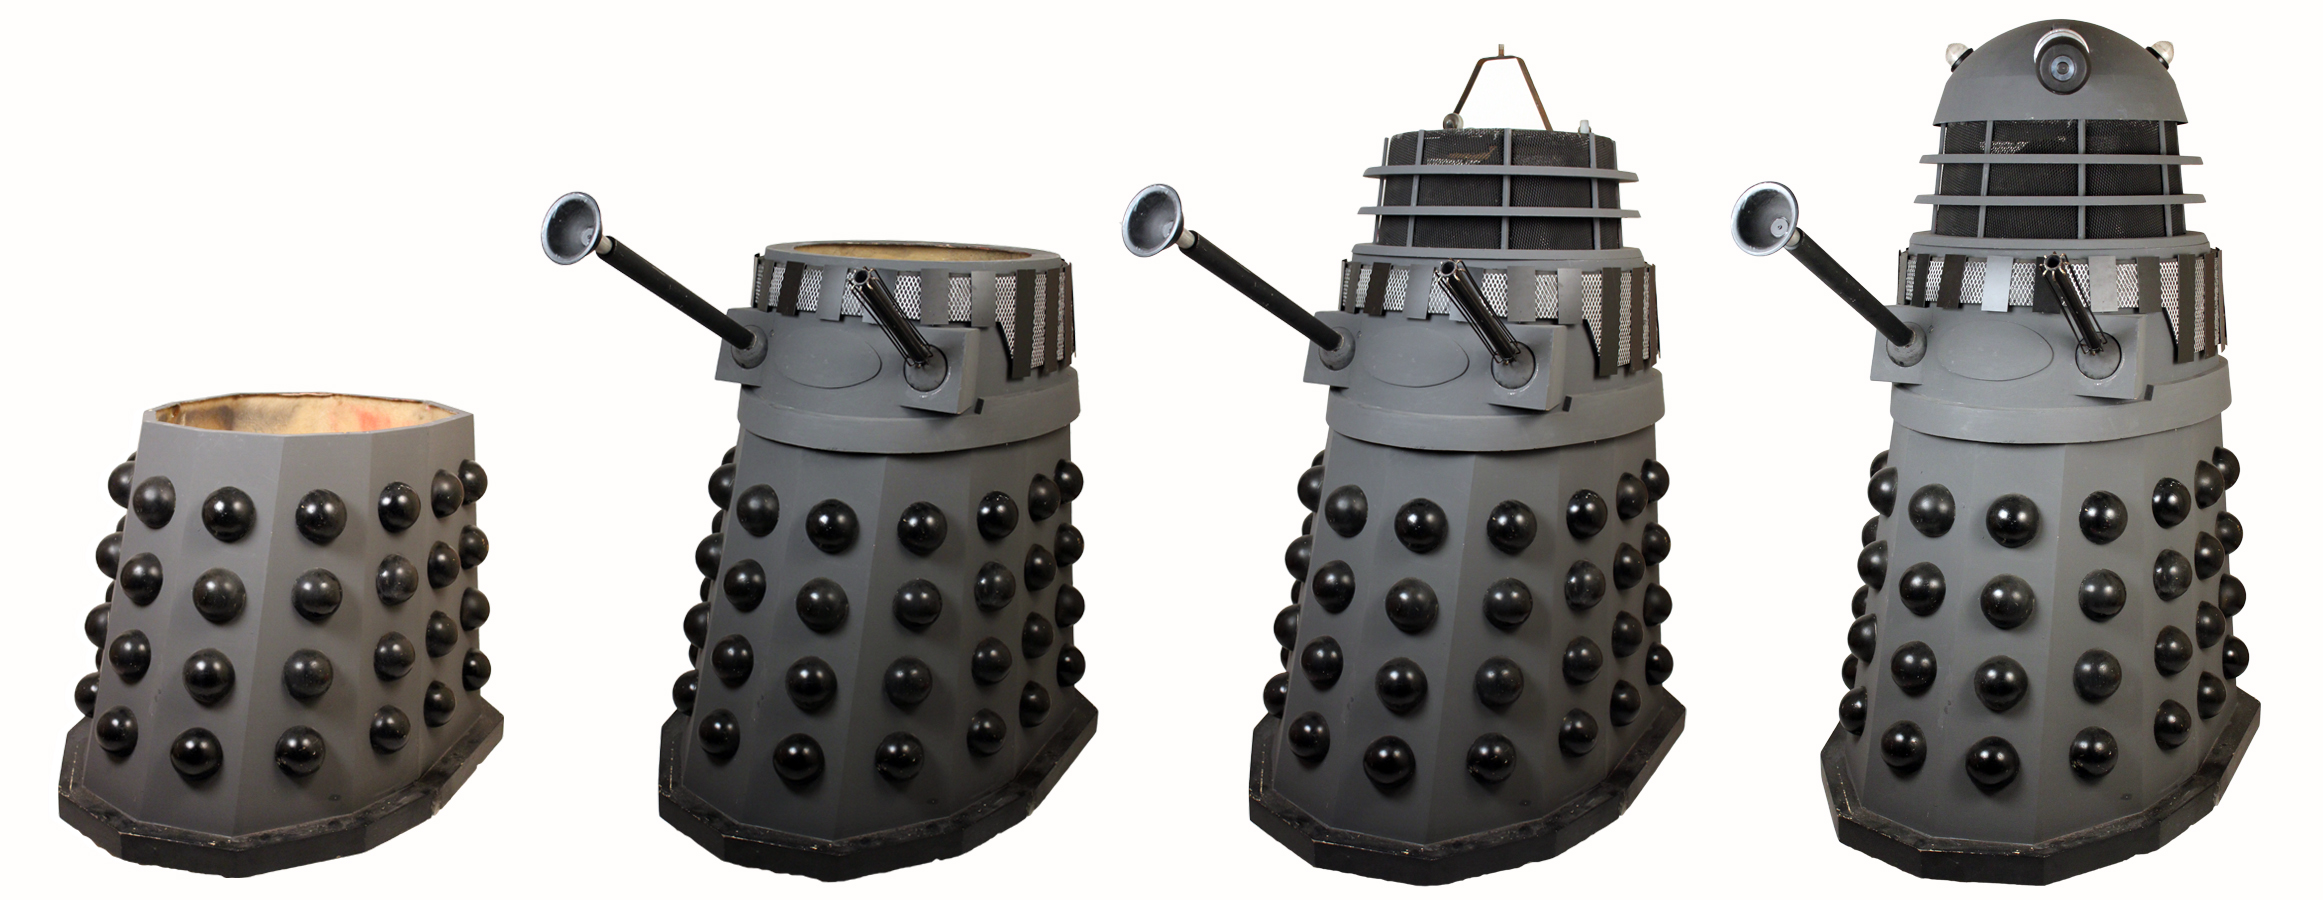 Original screen used dalek used in the production of Doctor Who